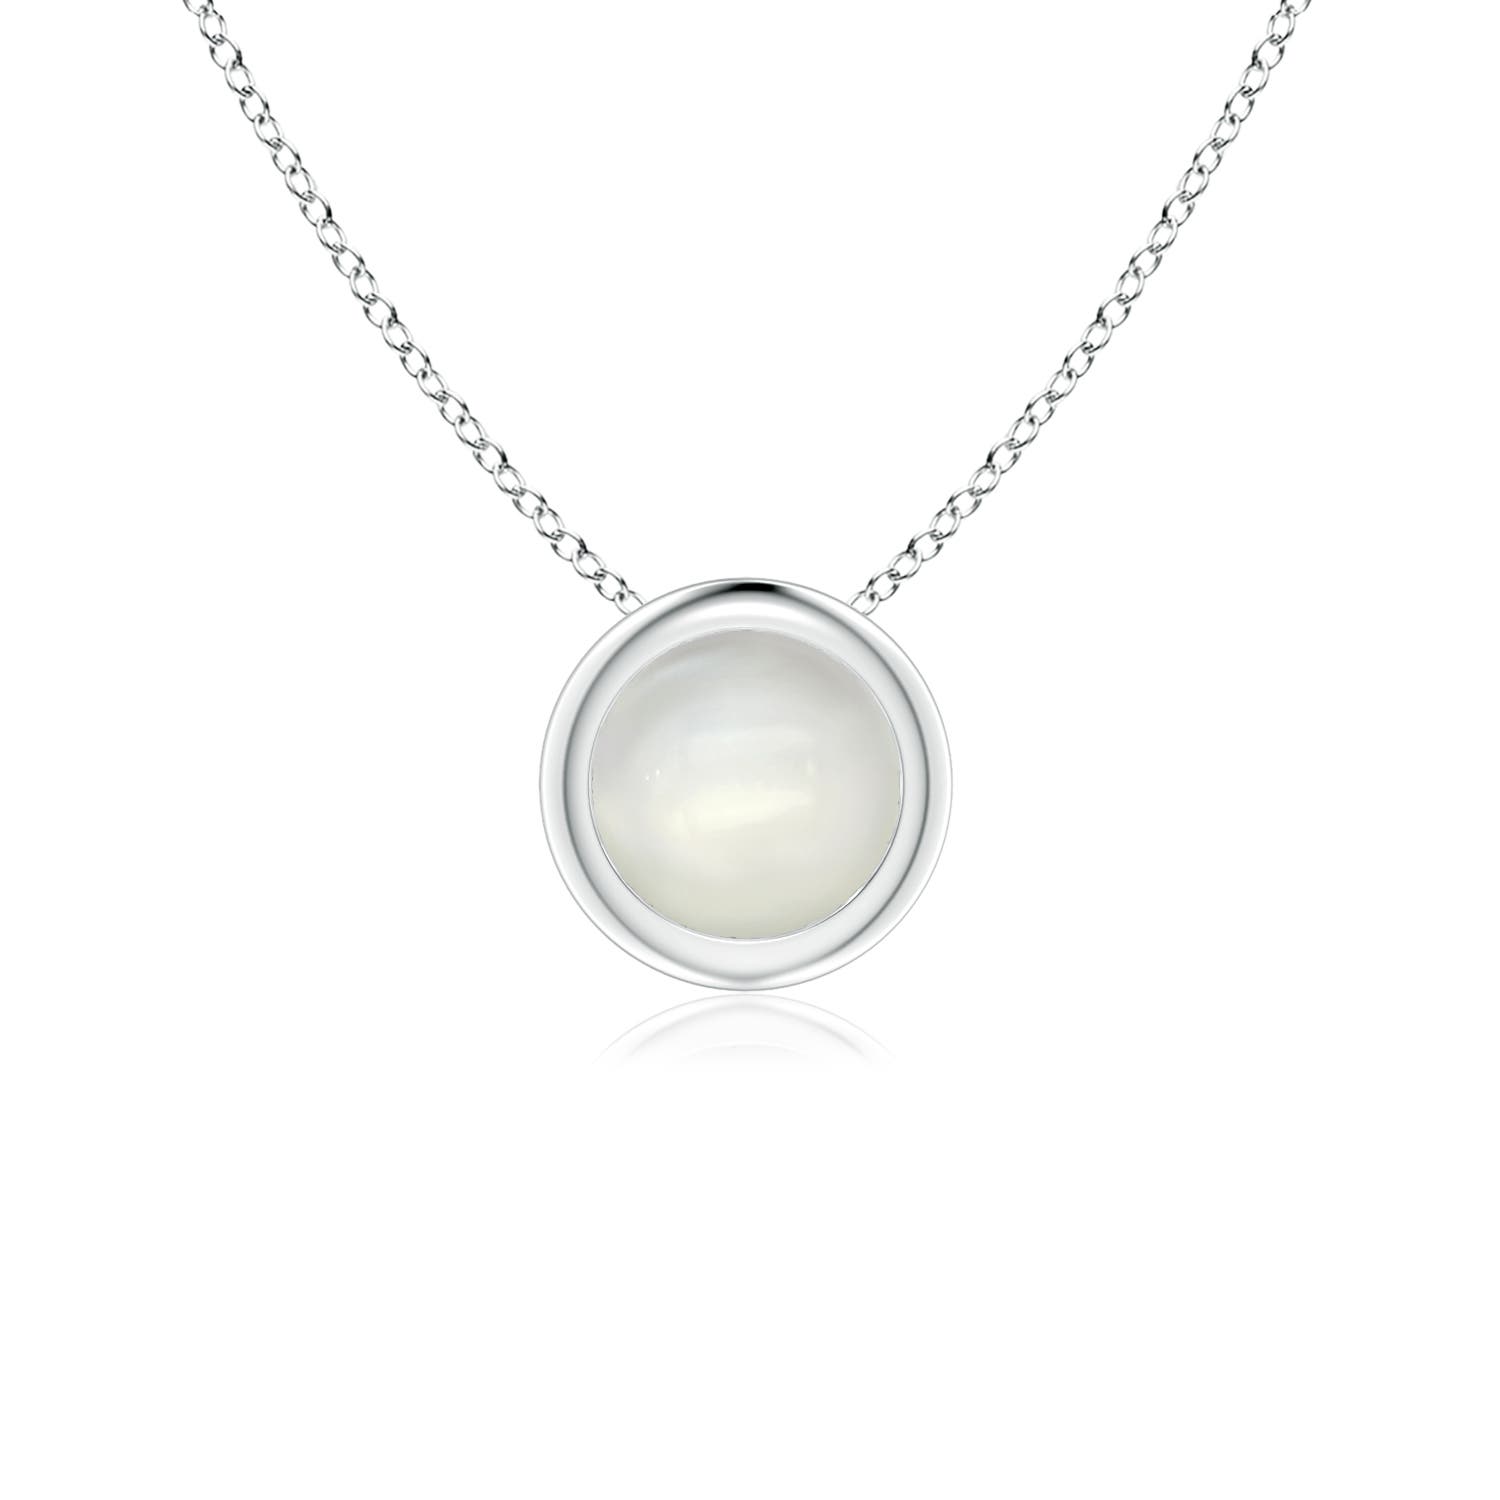 Shop Moonstone Necklaces for Women | Angara